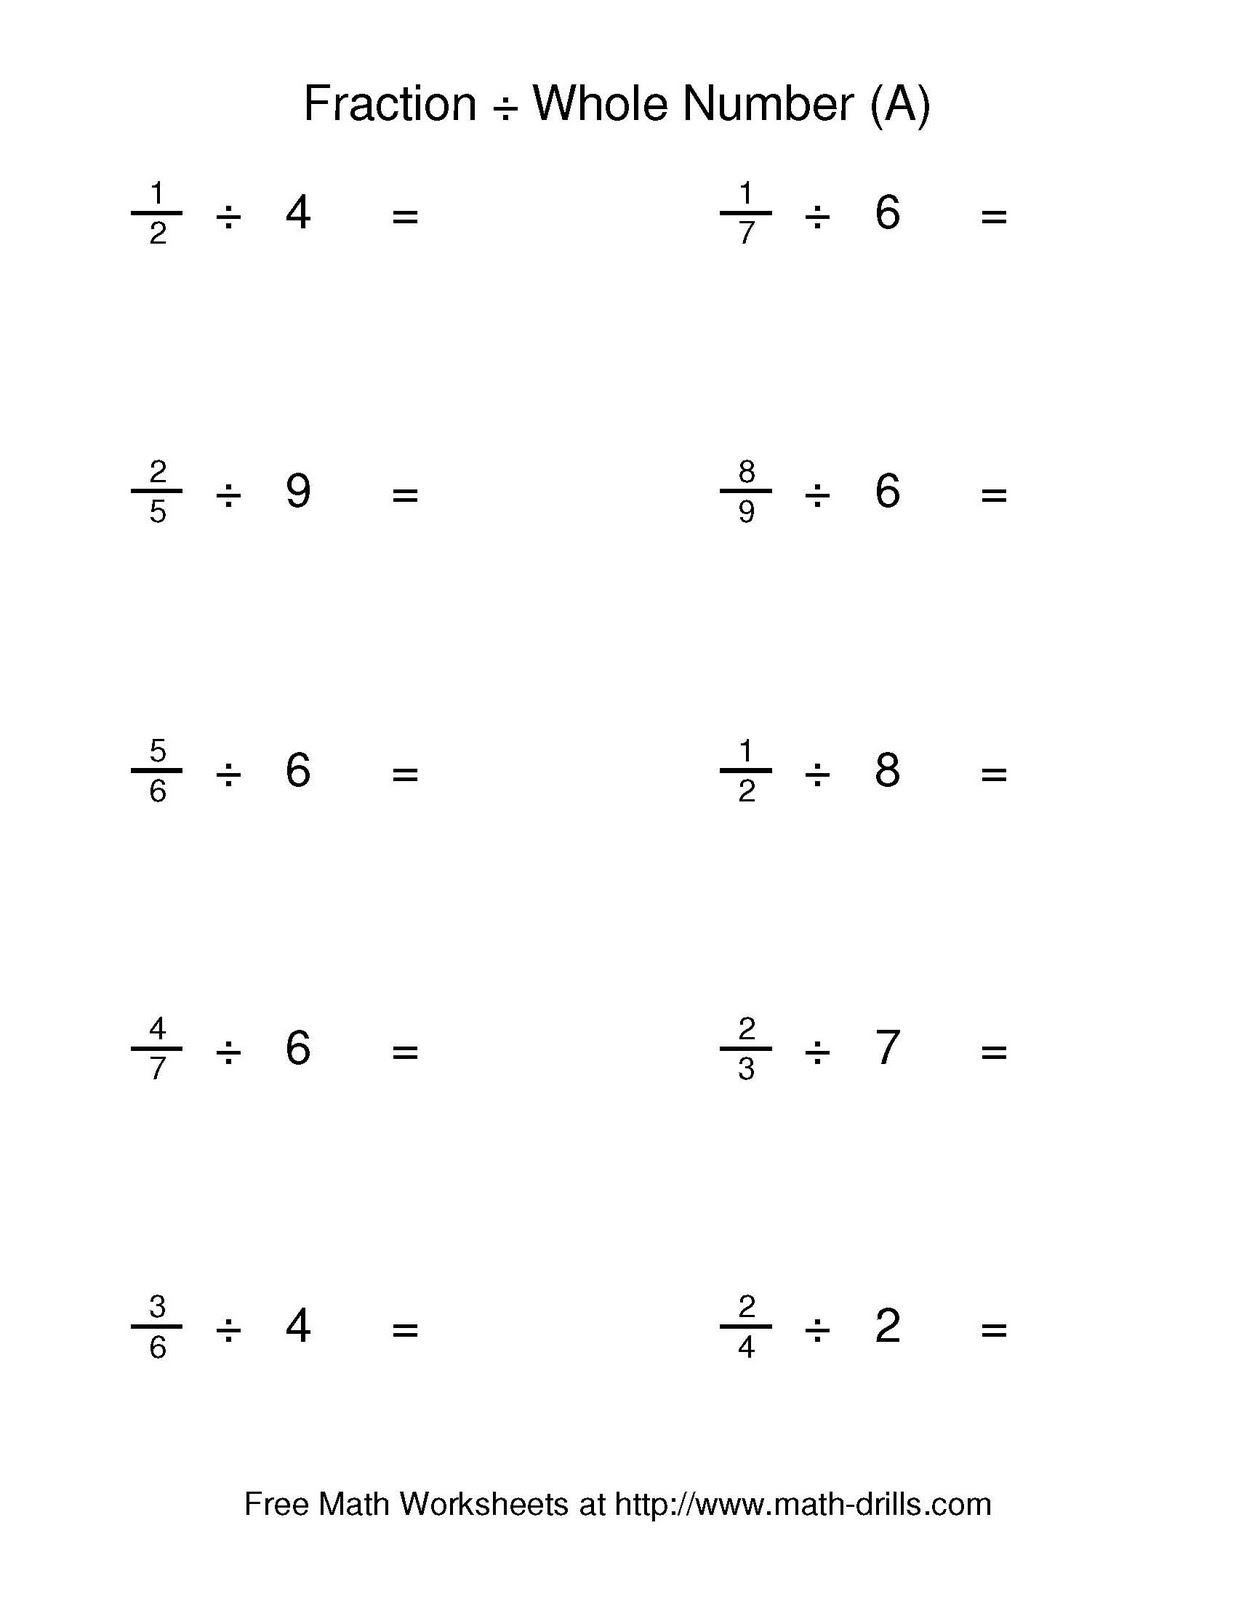 Dividing Fractions With Mixed Numbers Worksheet